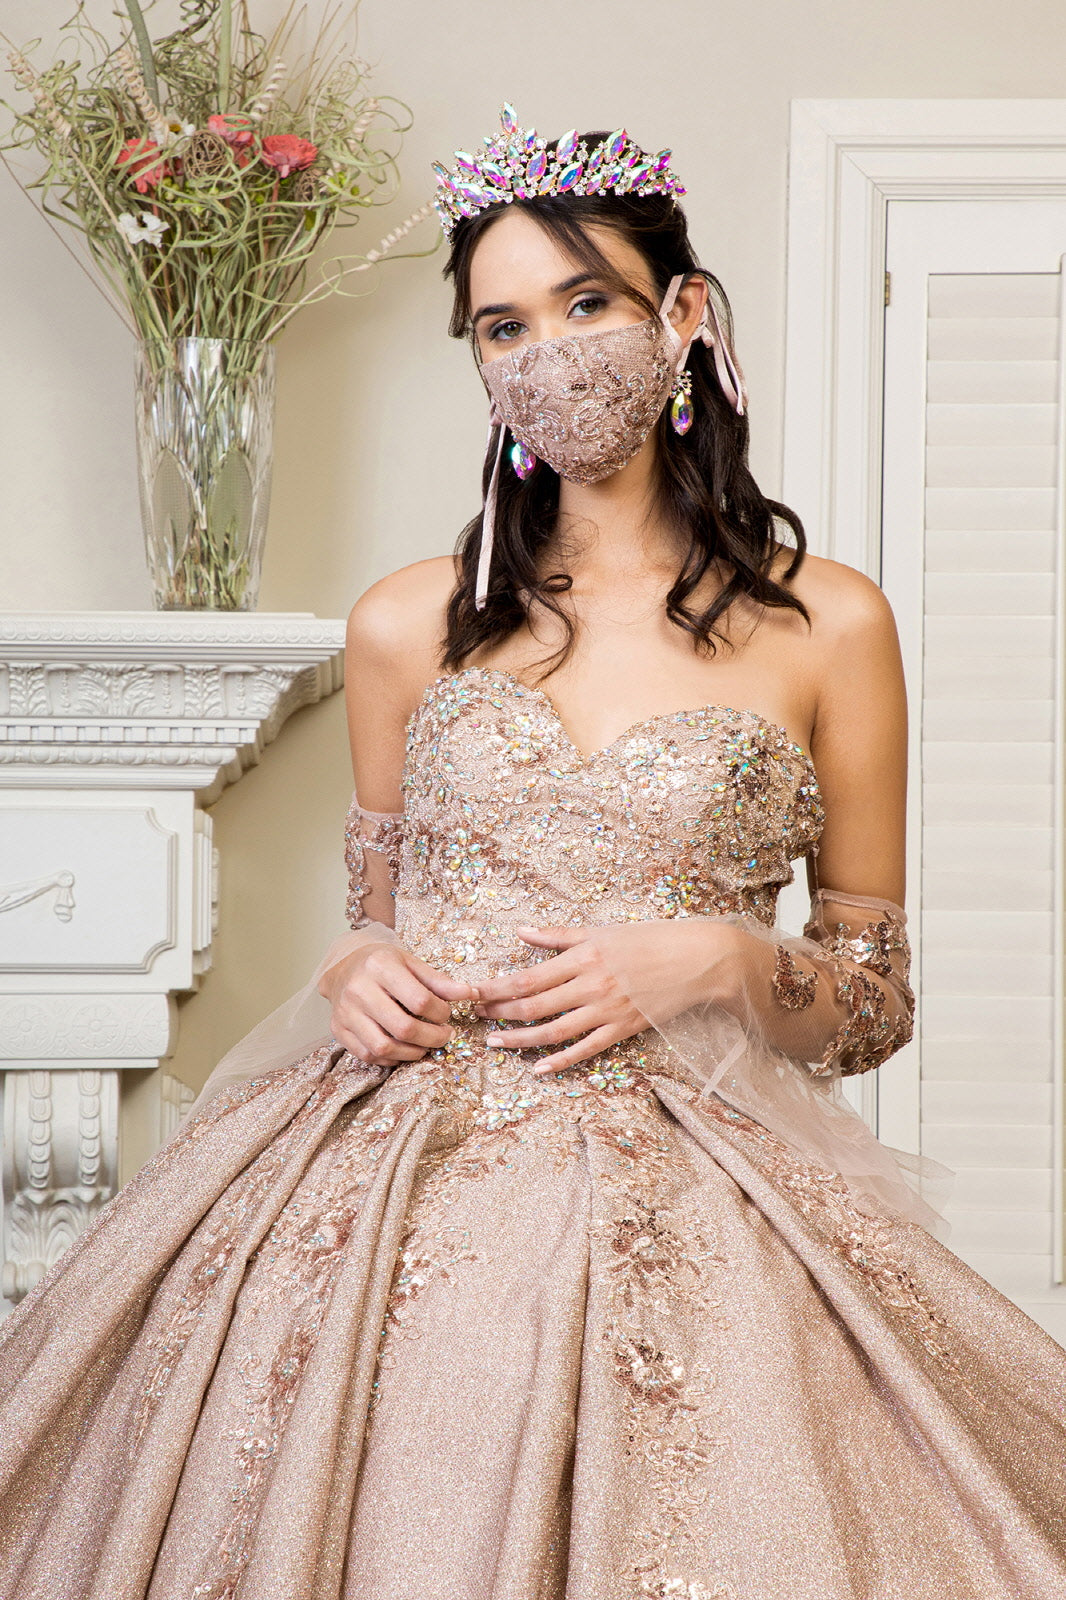 Sweethearted Ruffle Tail Quinceanera Dress Detached Mesh Sleeve - Mask Not Included GLGL1912 Elsy Style QUINCEANERA